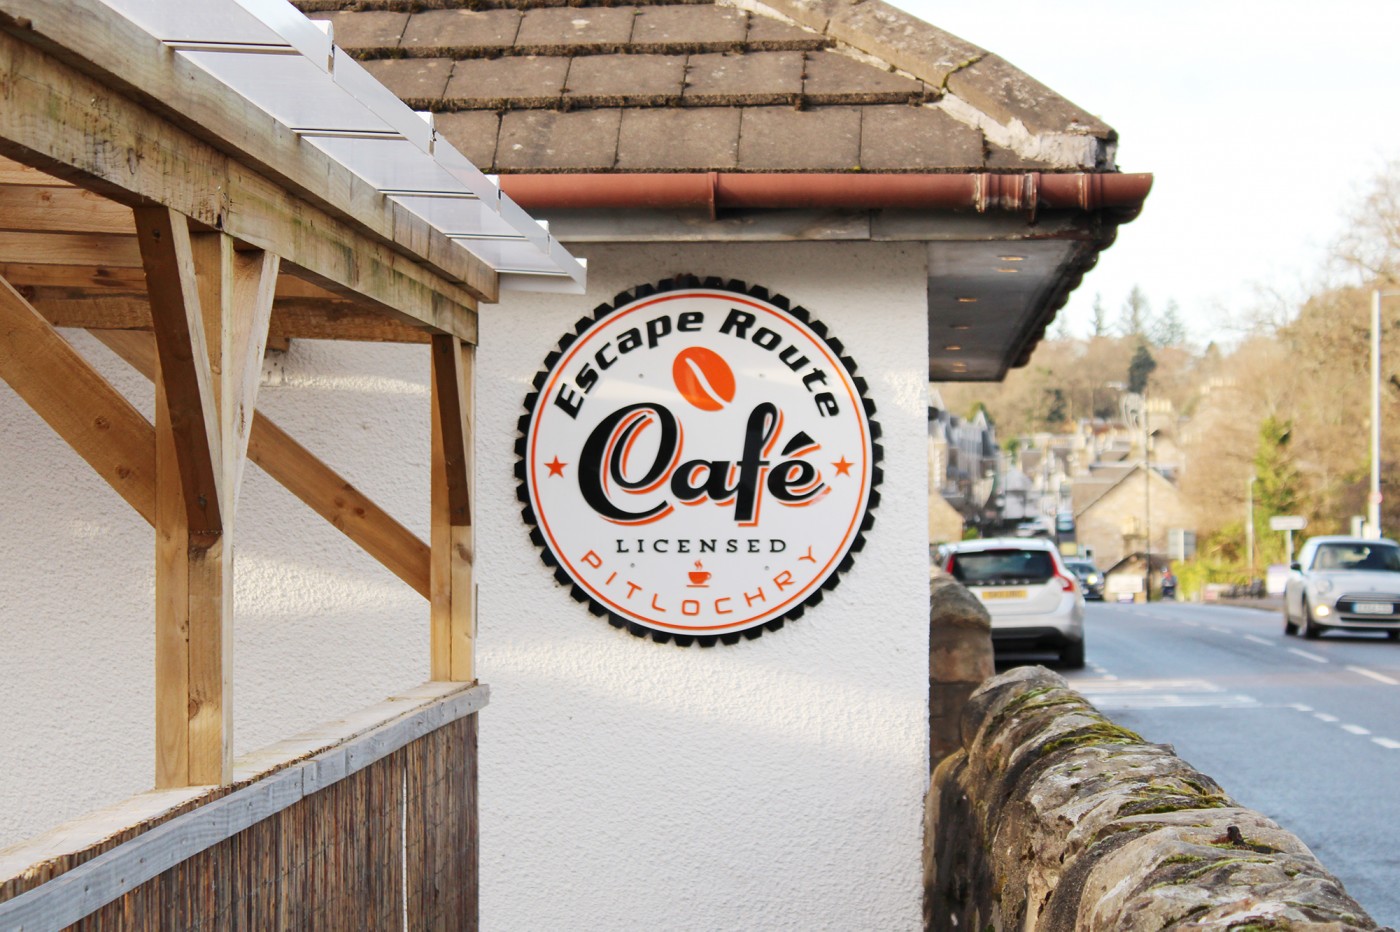 Escape Route Cafe in Pitlochry